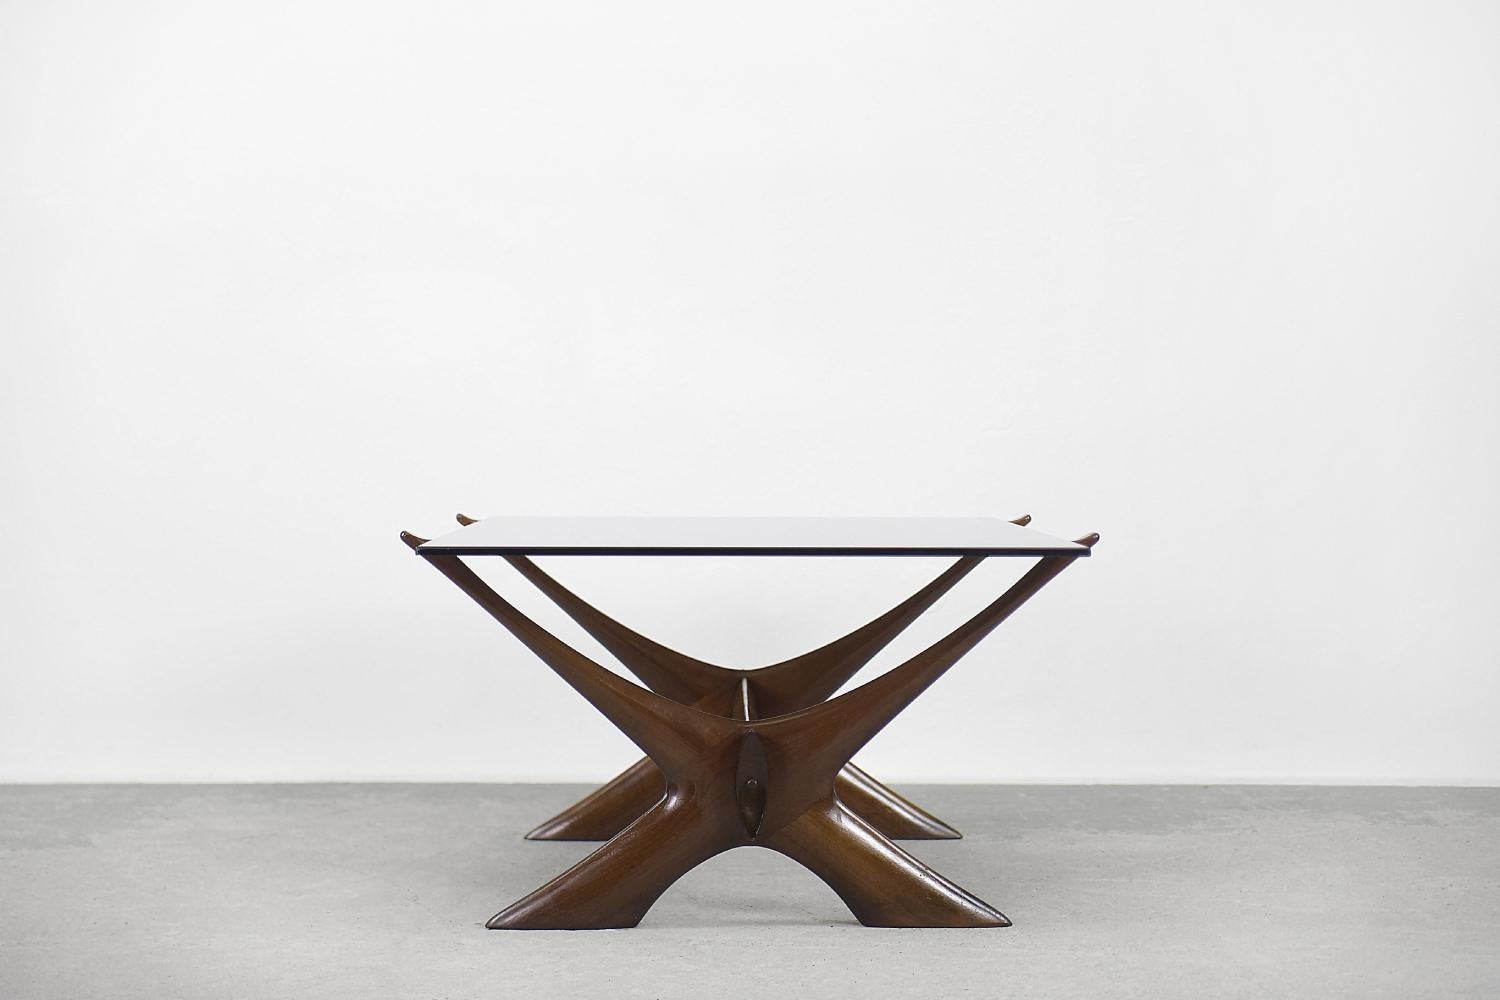 Vintage Mid-Century Modern Walnut Wood Condor Coffee Table from Örebro Glass In Good Condition For Sale In Warszawa, Mazowieckie